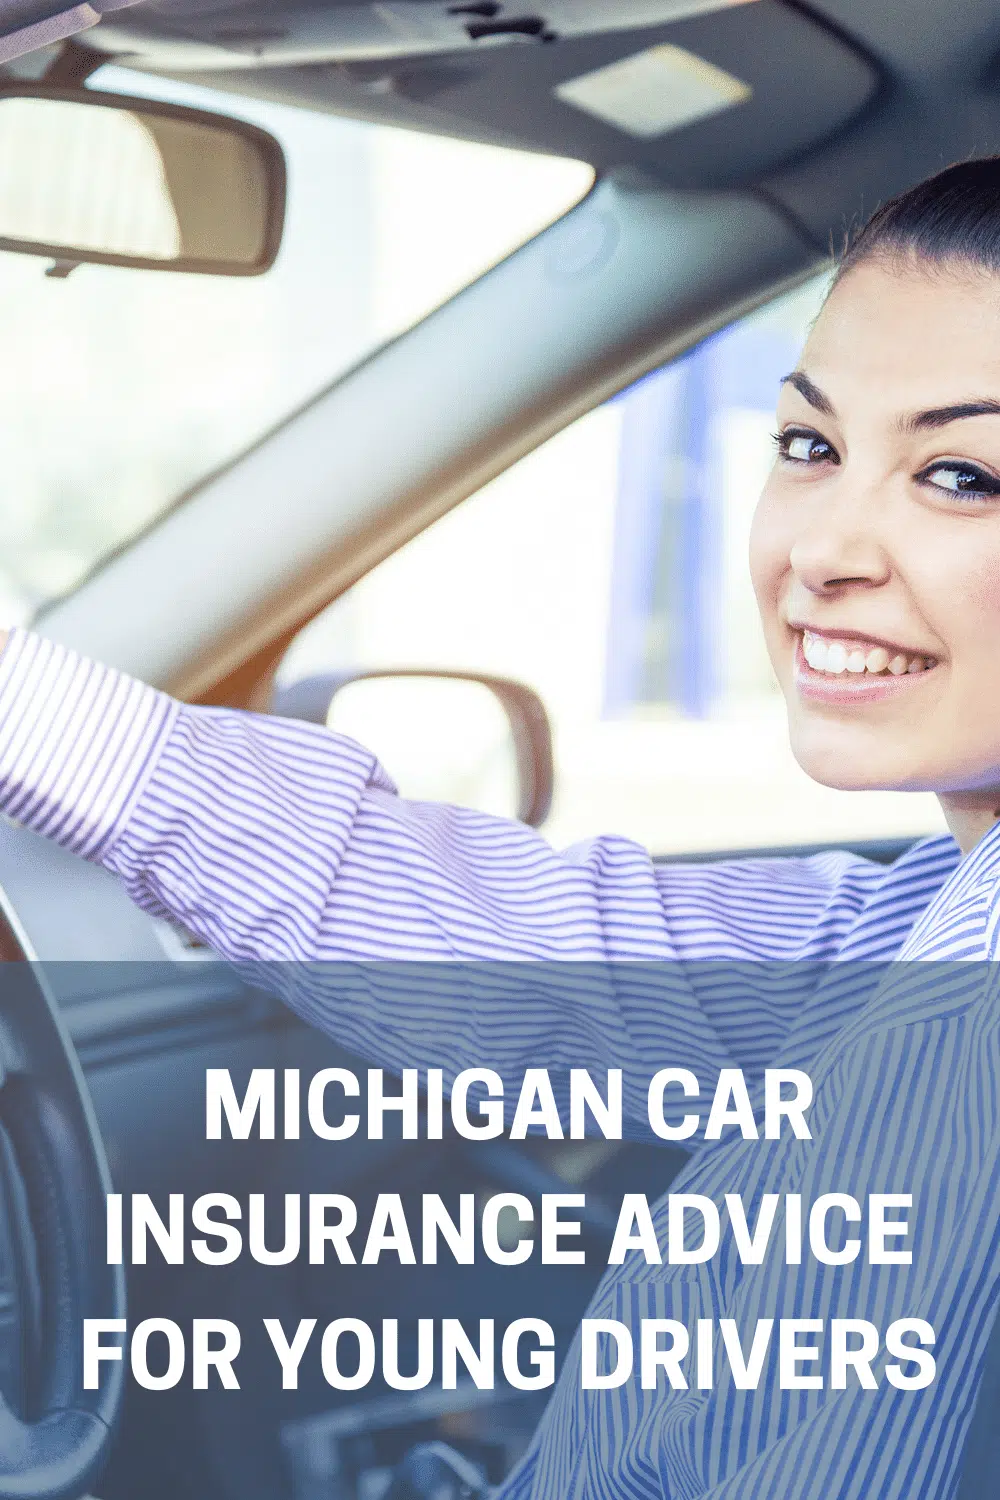 Car Insurance Advice For Young Drivers: Here\'s What To Know